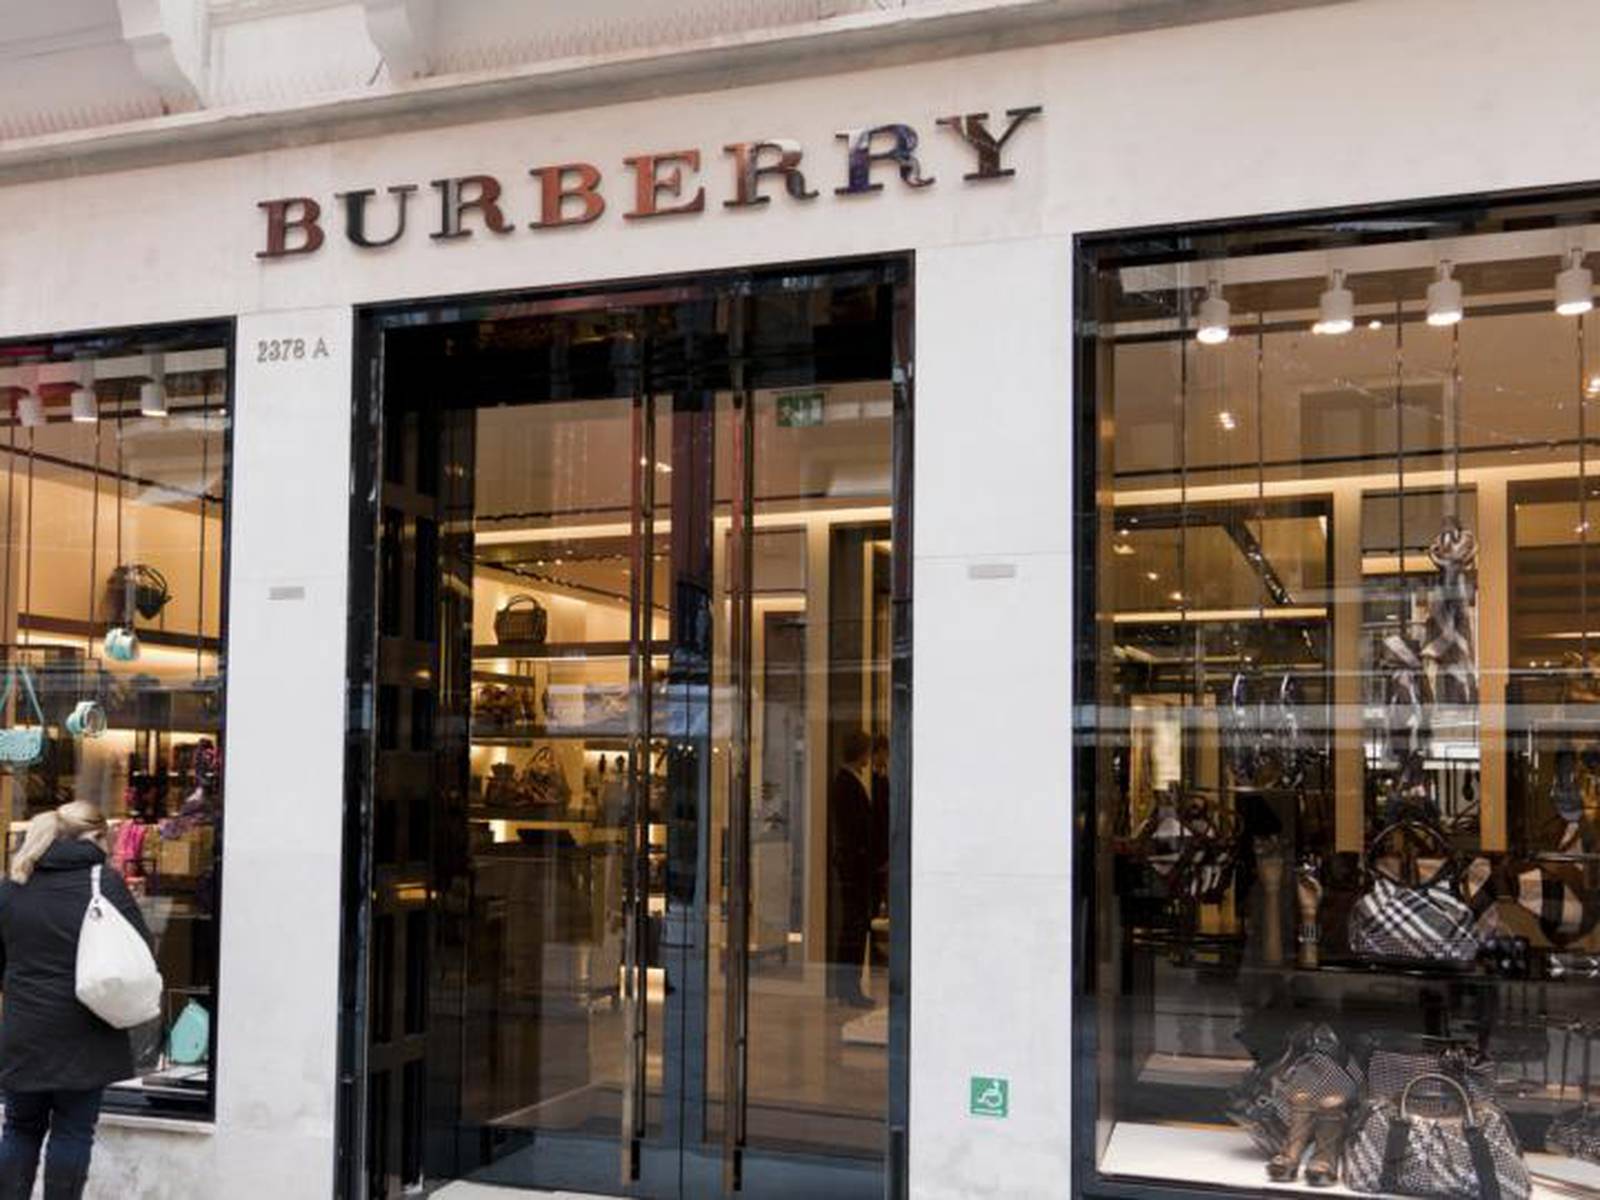 Burberry shares spike on reports of Coach merger – The Irish Times